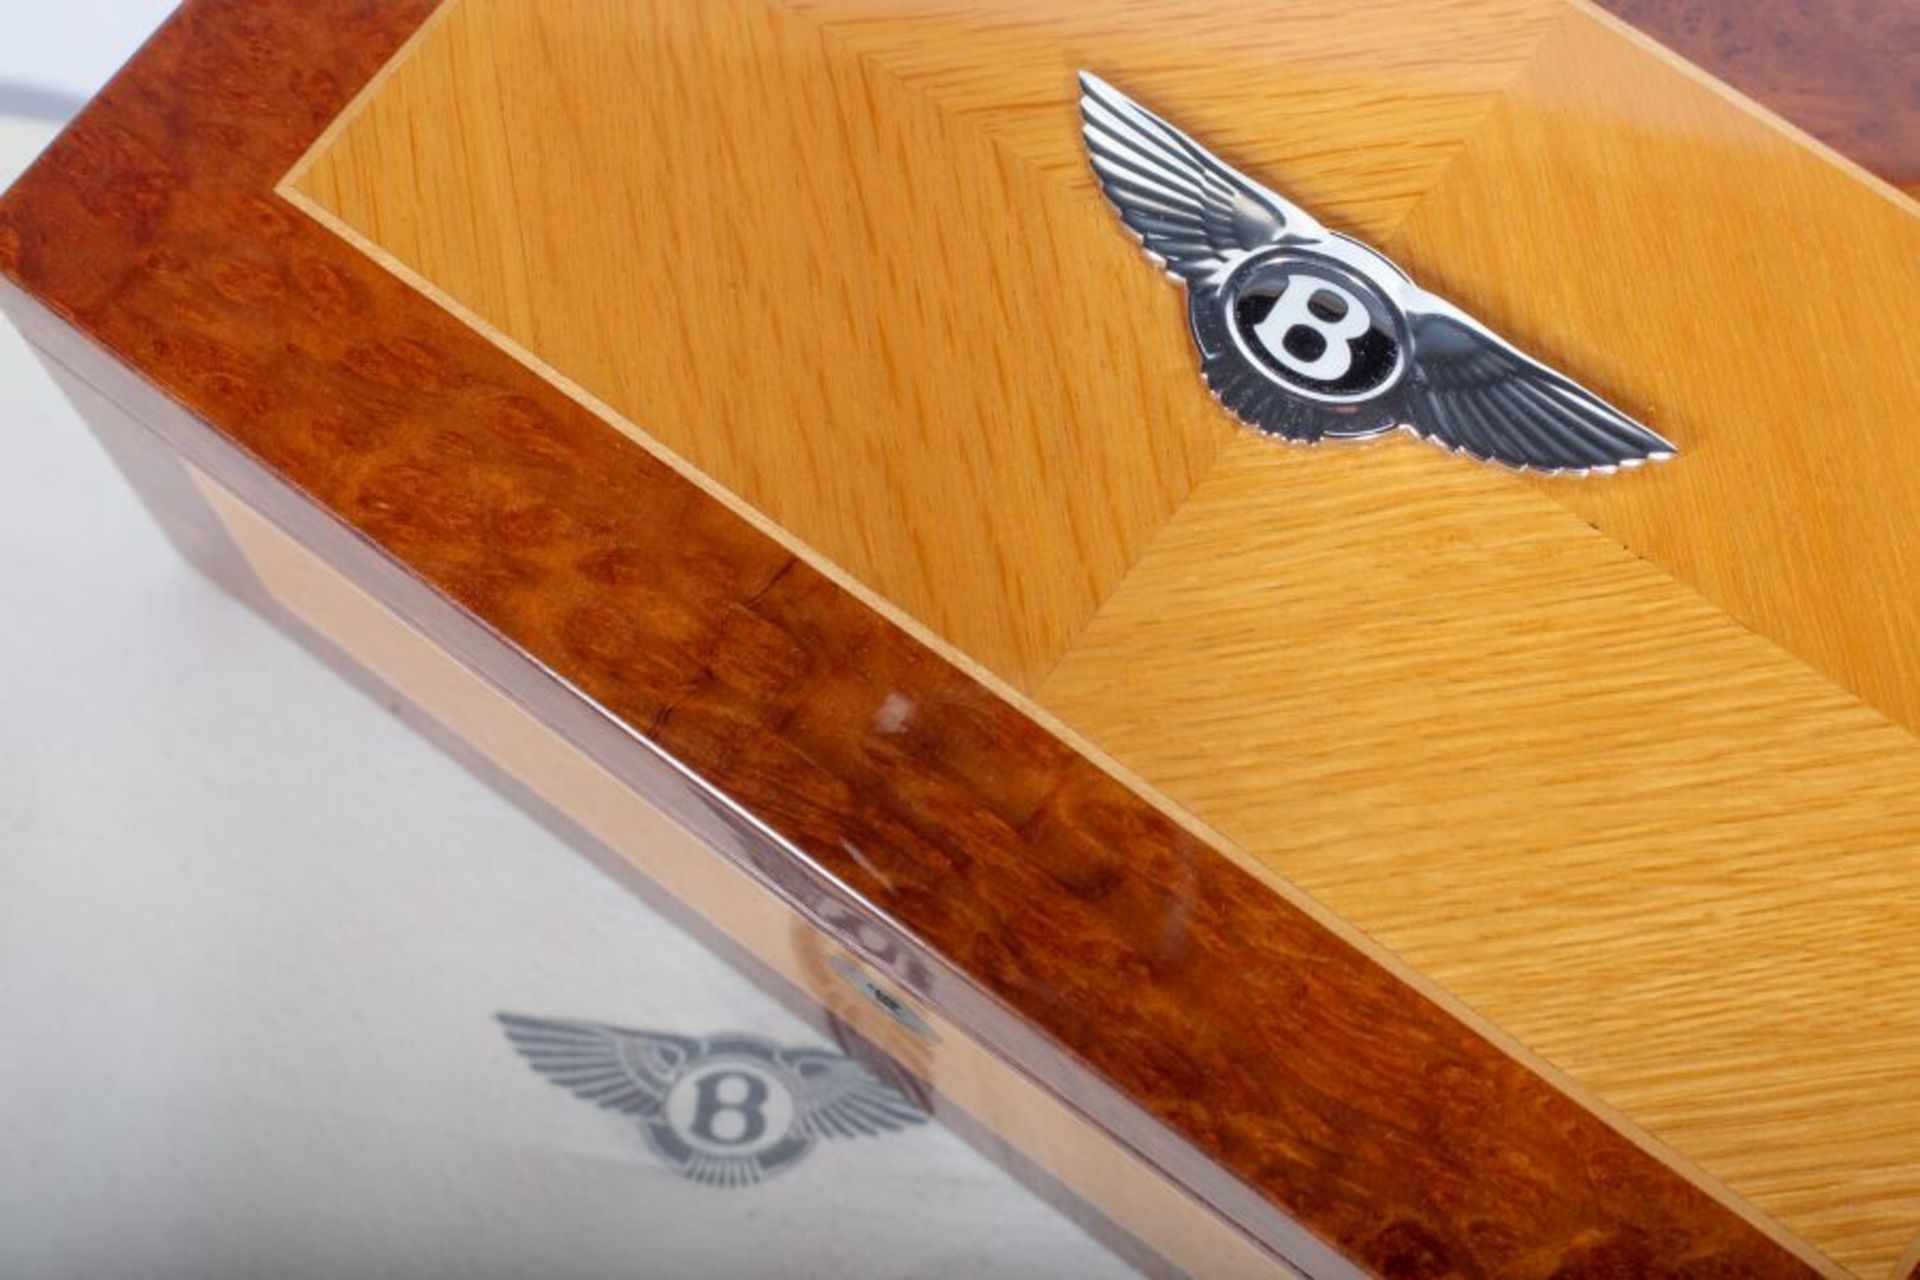 A Tibaldi for Bentley special edition Sterling silver fountain pen to commemorate 60 years of - Image 3 of 14